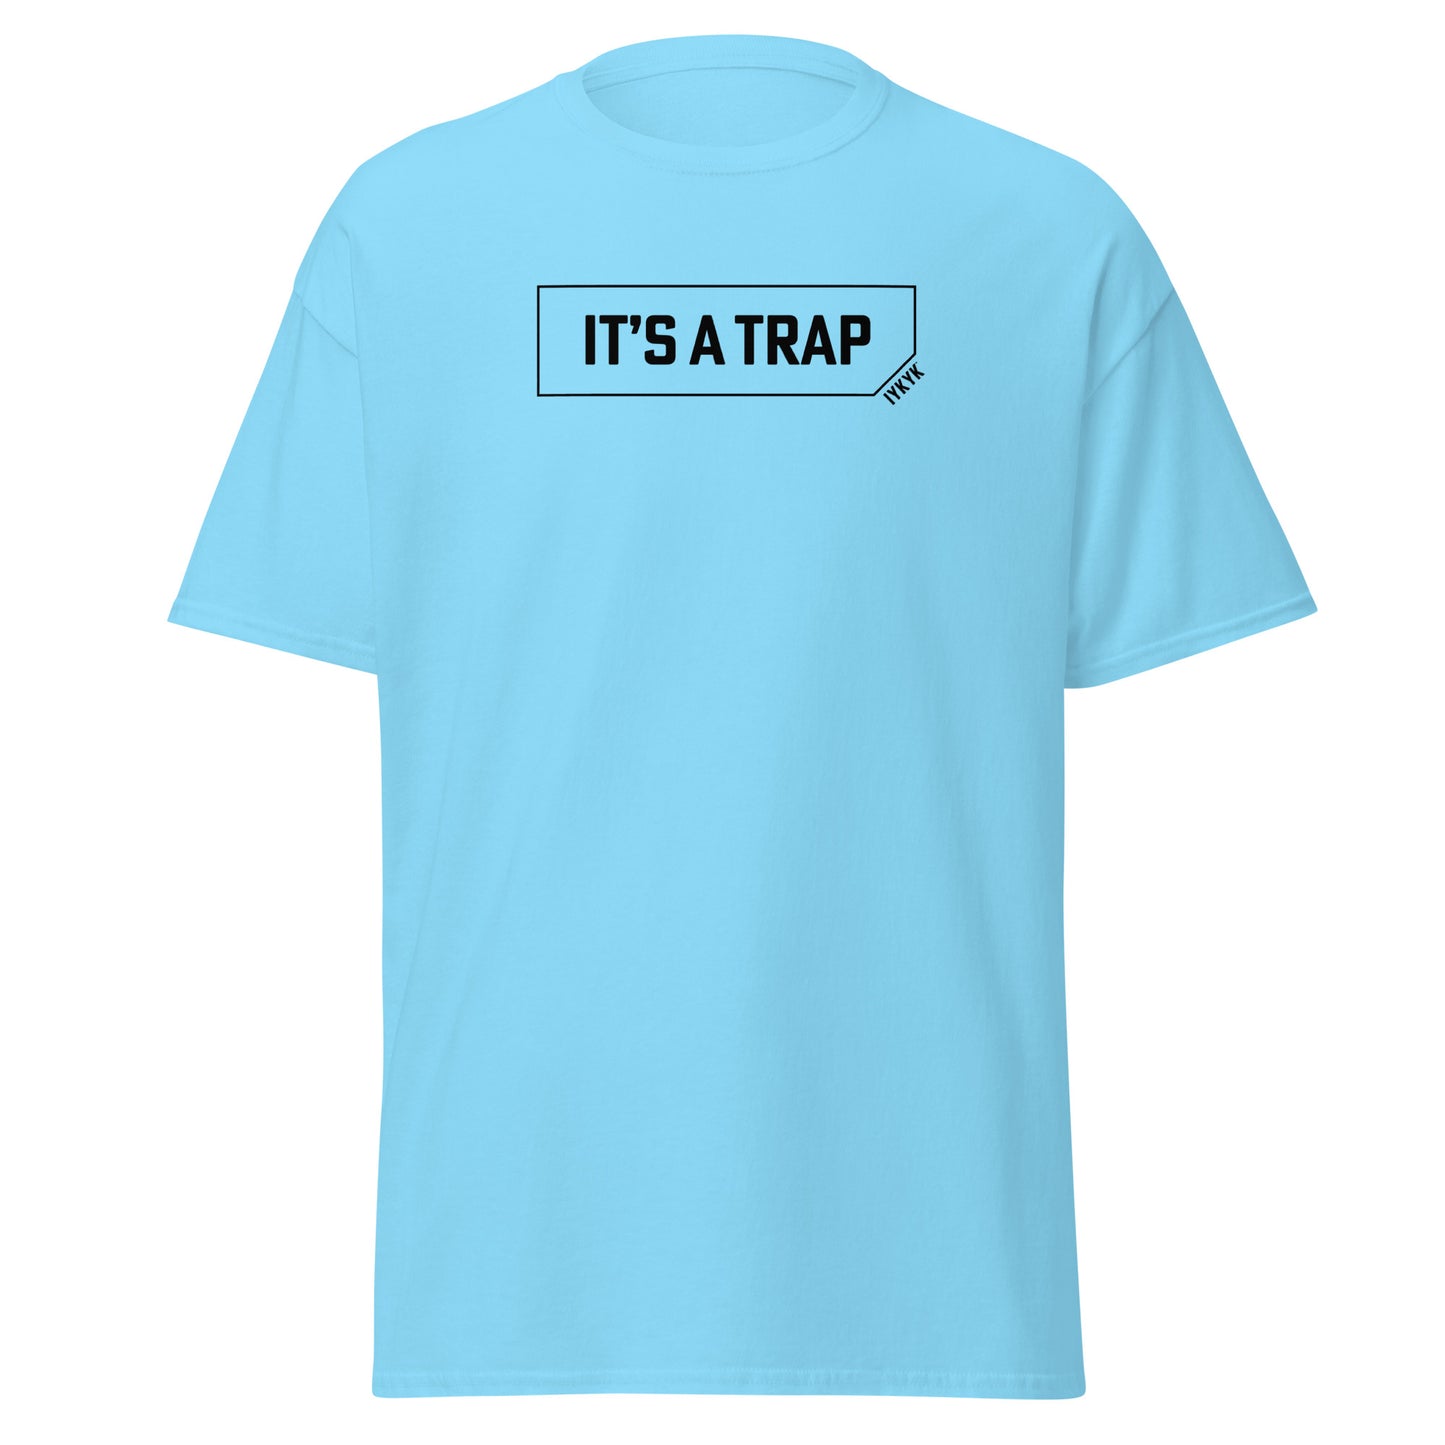 Classic Everyday Star Wars Trap Tee